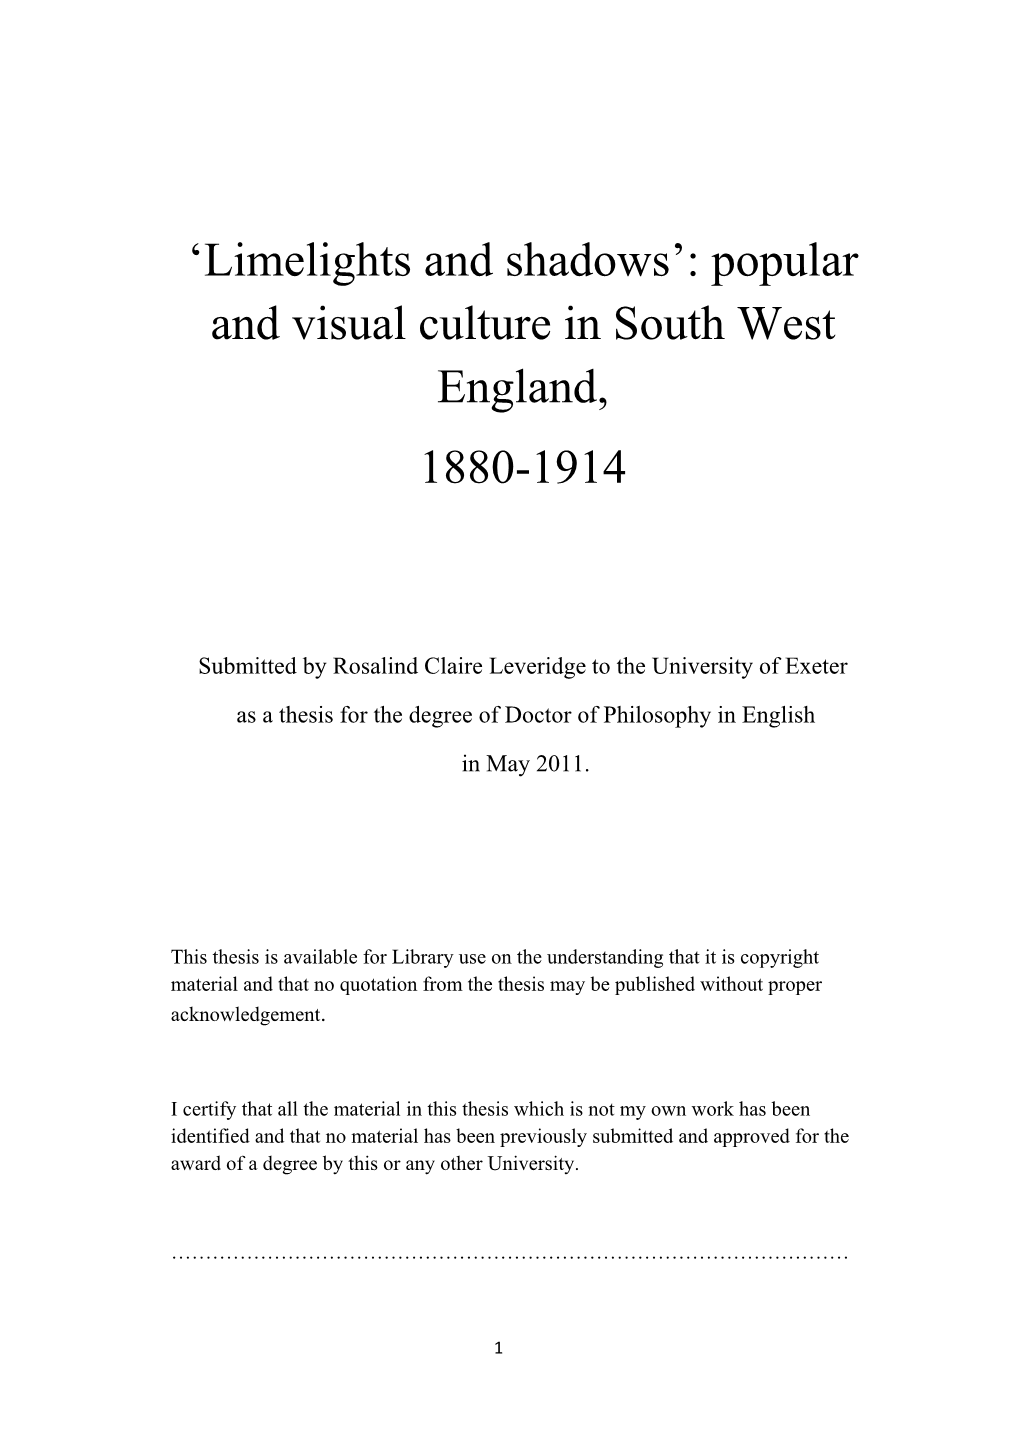 'Limelights and Shadows': Popular and Visual Culture in South West